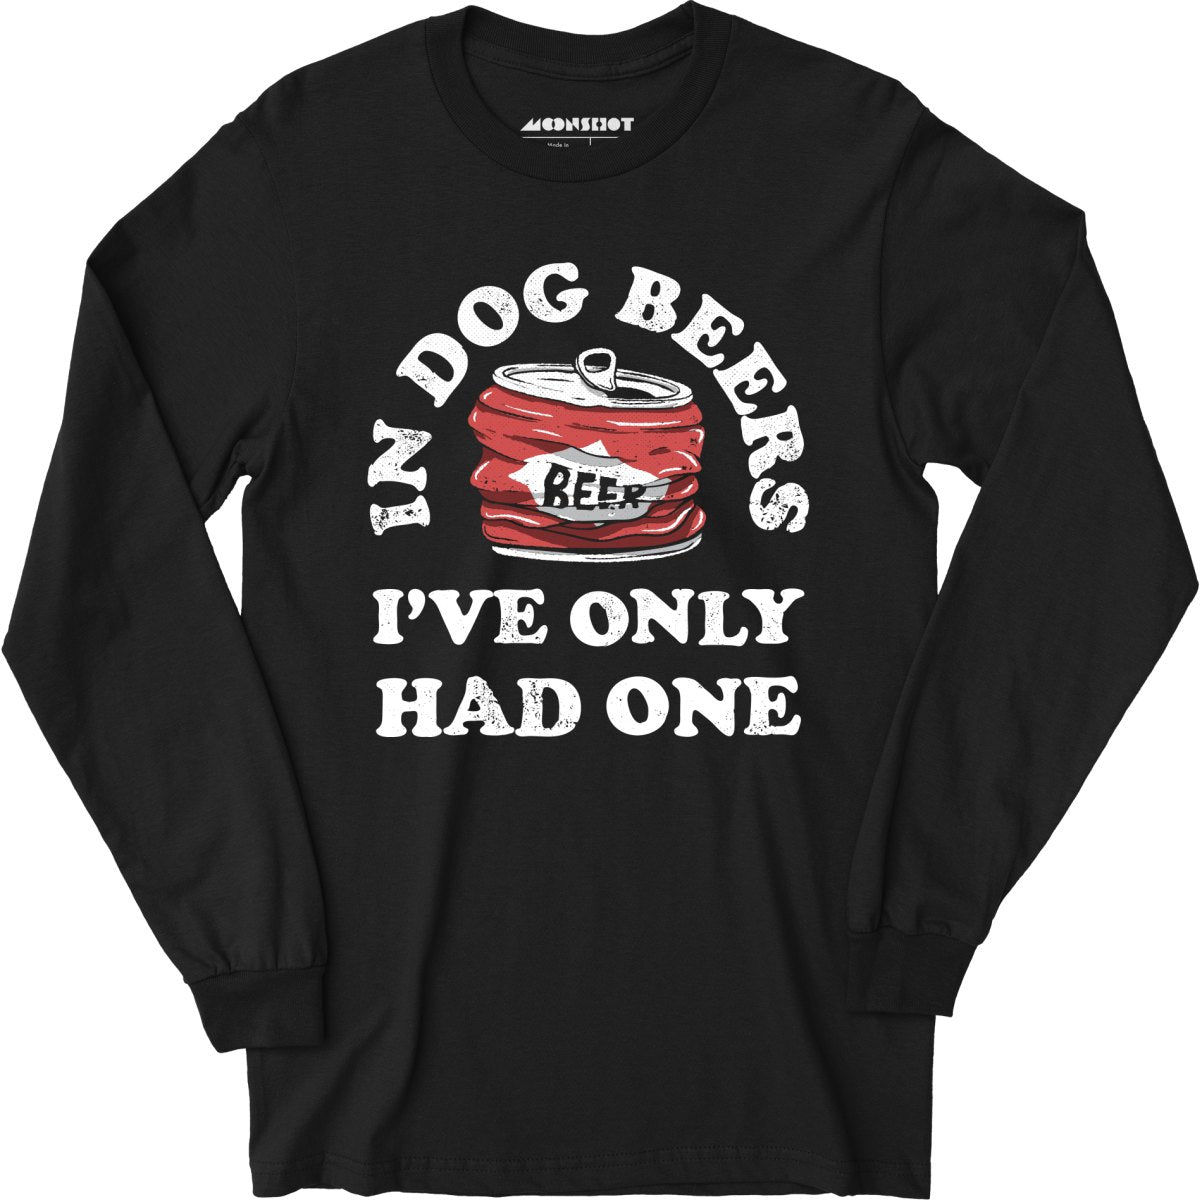 In Dog Beers I've Only Had One - Long Sleeve T-Shirt